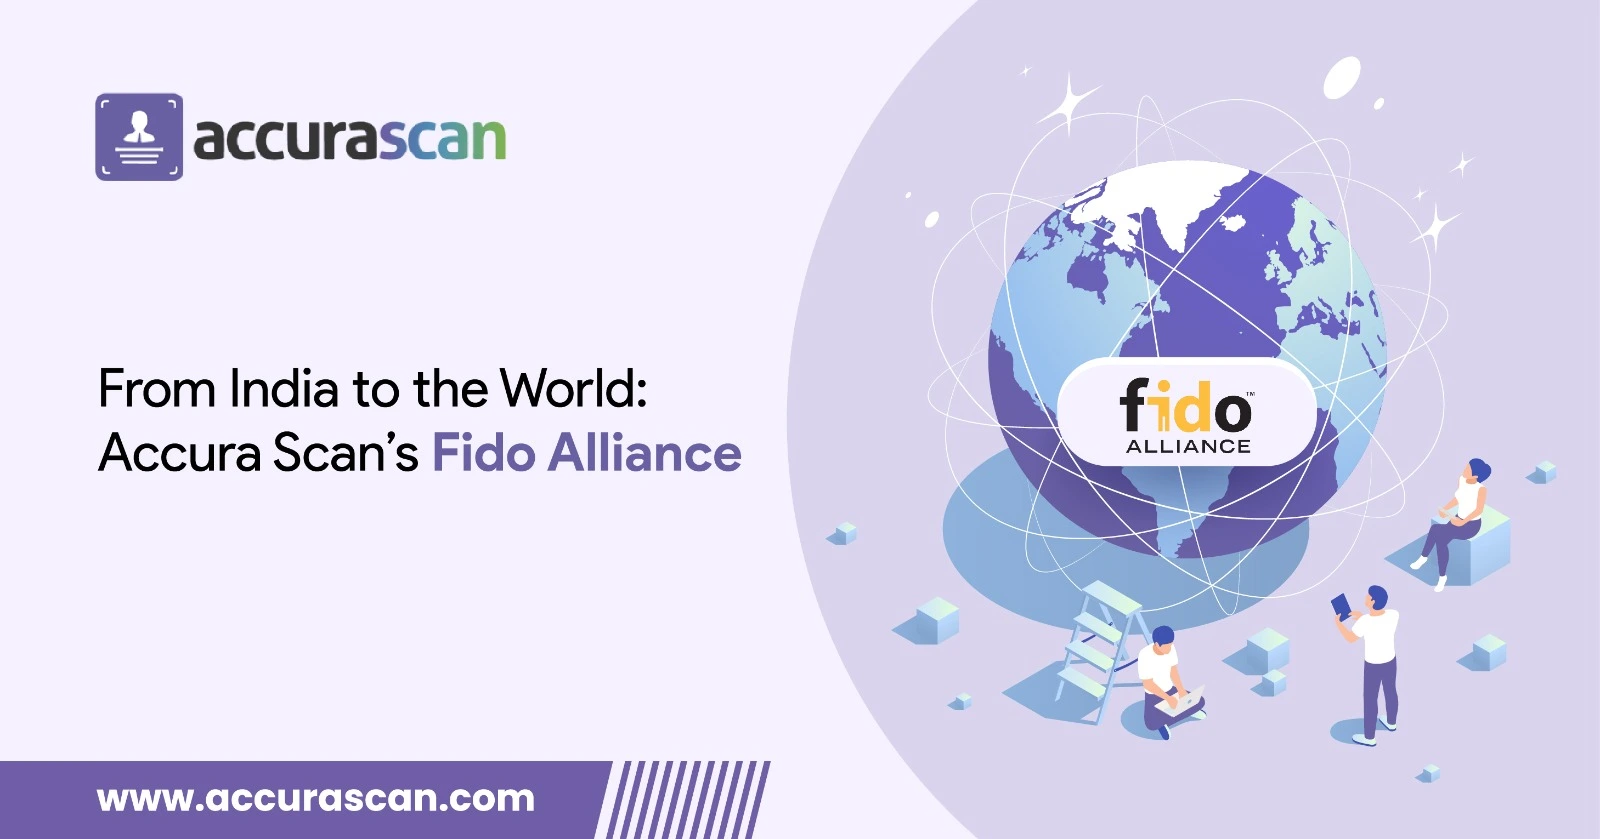 From India to the World: Accura Scan’s Fido Alliance